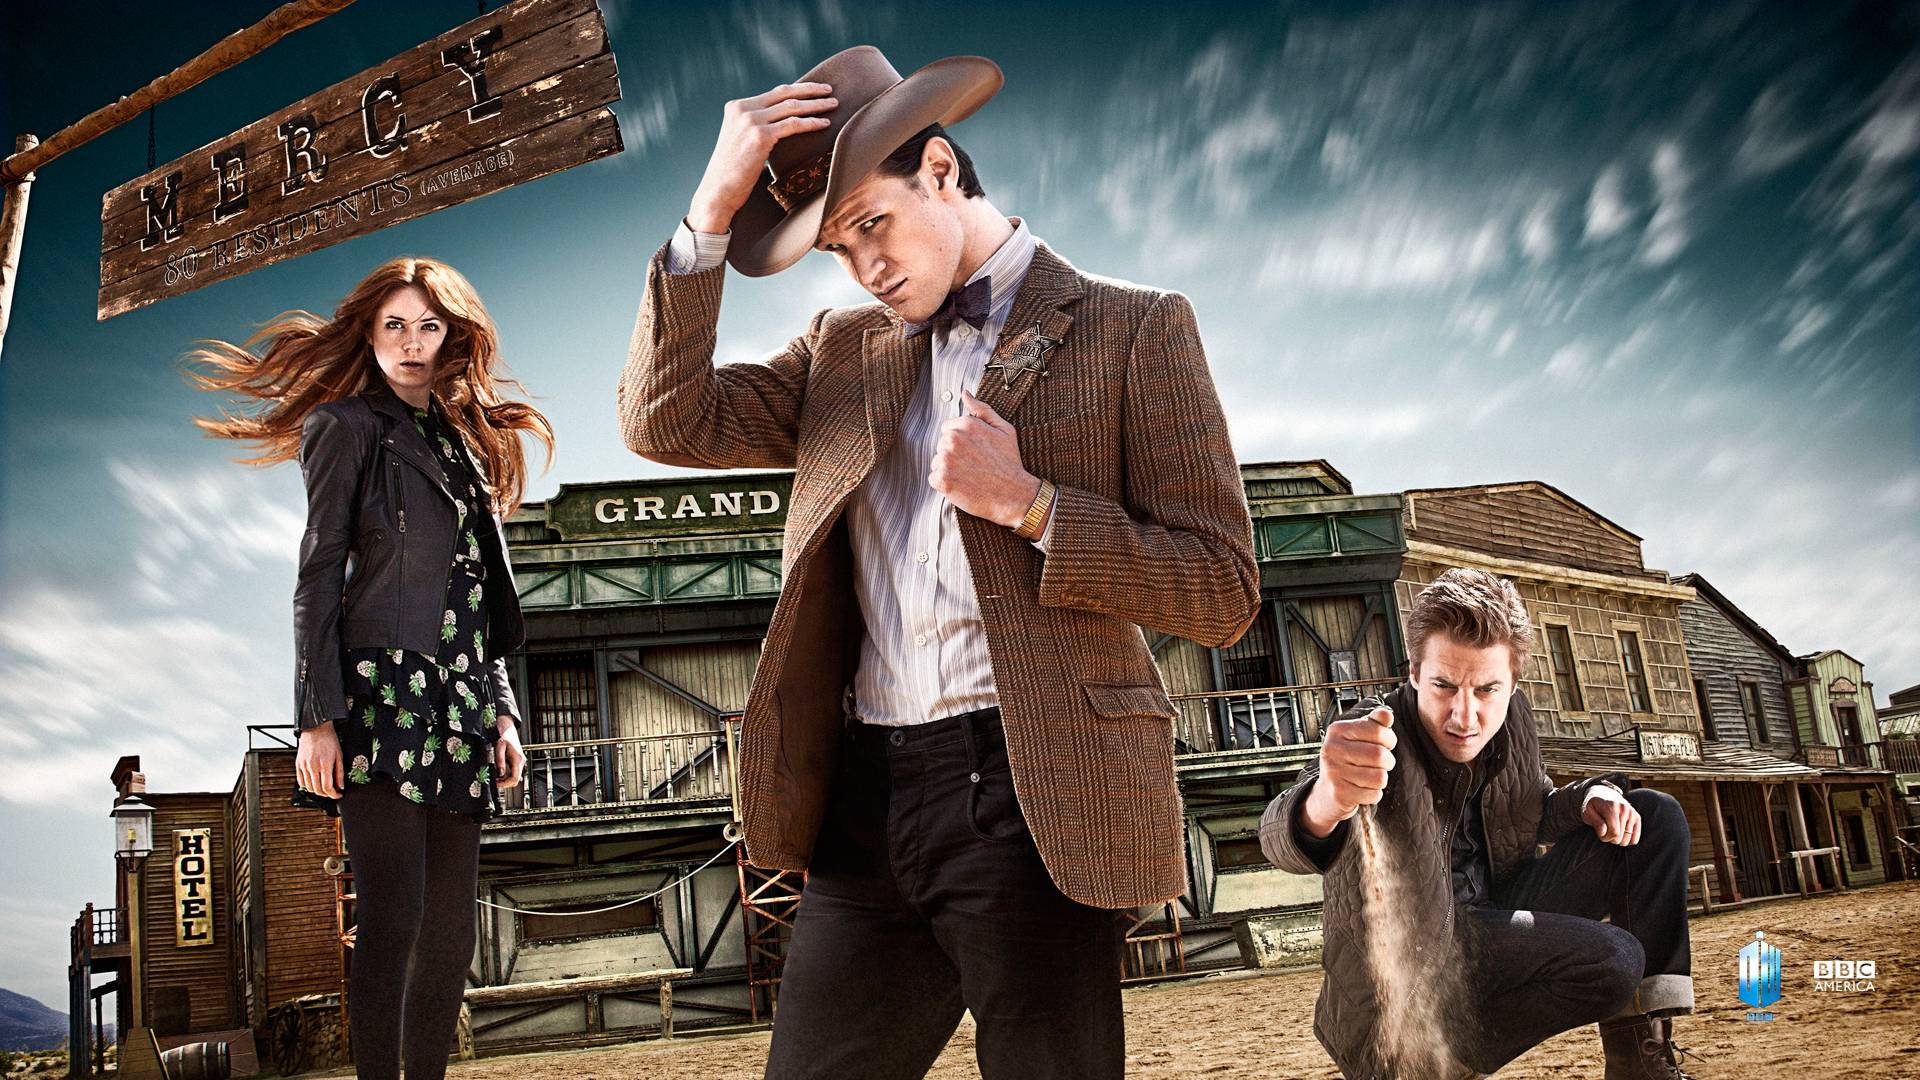 Welcome to the Wild West. Season 7 Wallpaper. Extras. Doctor